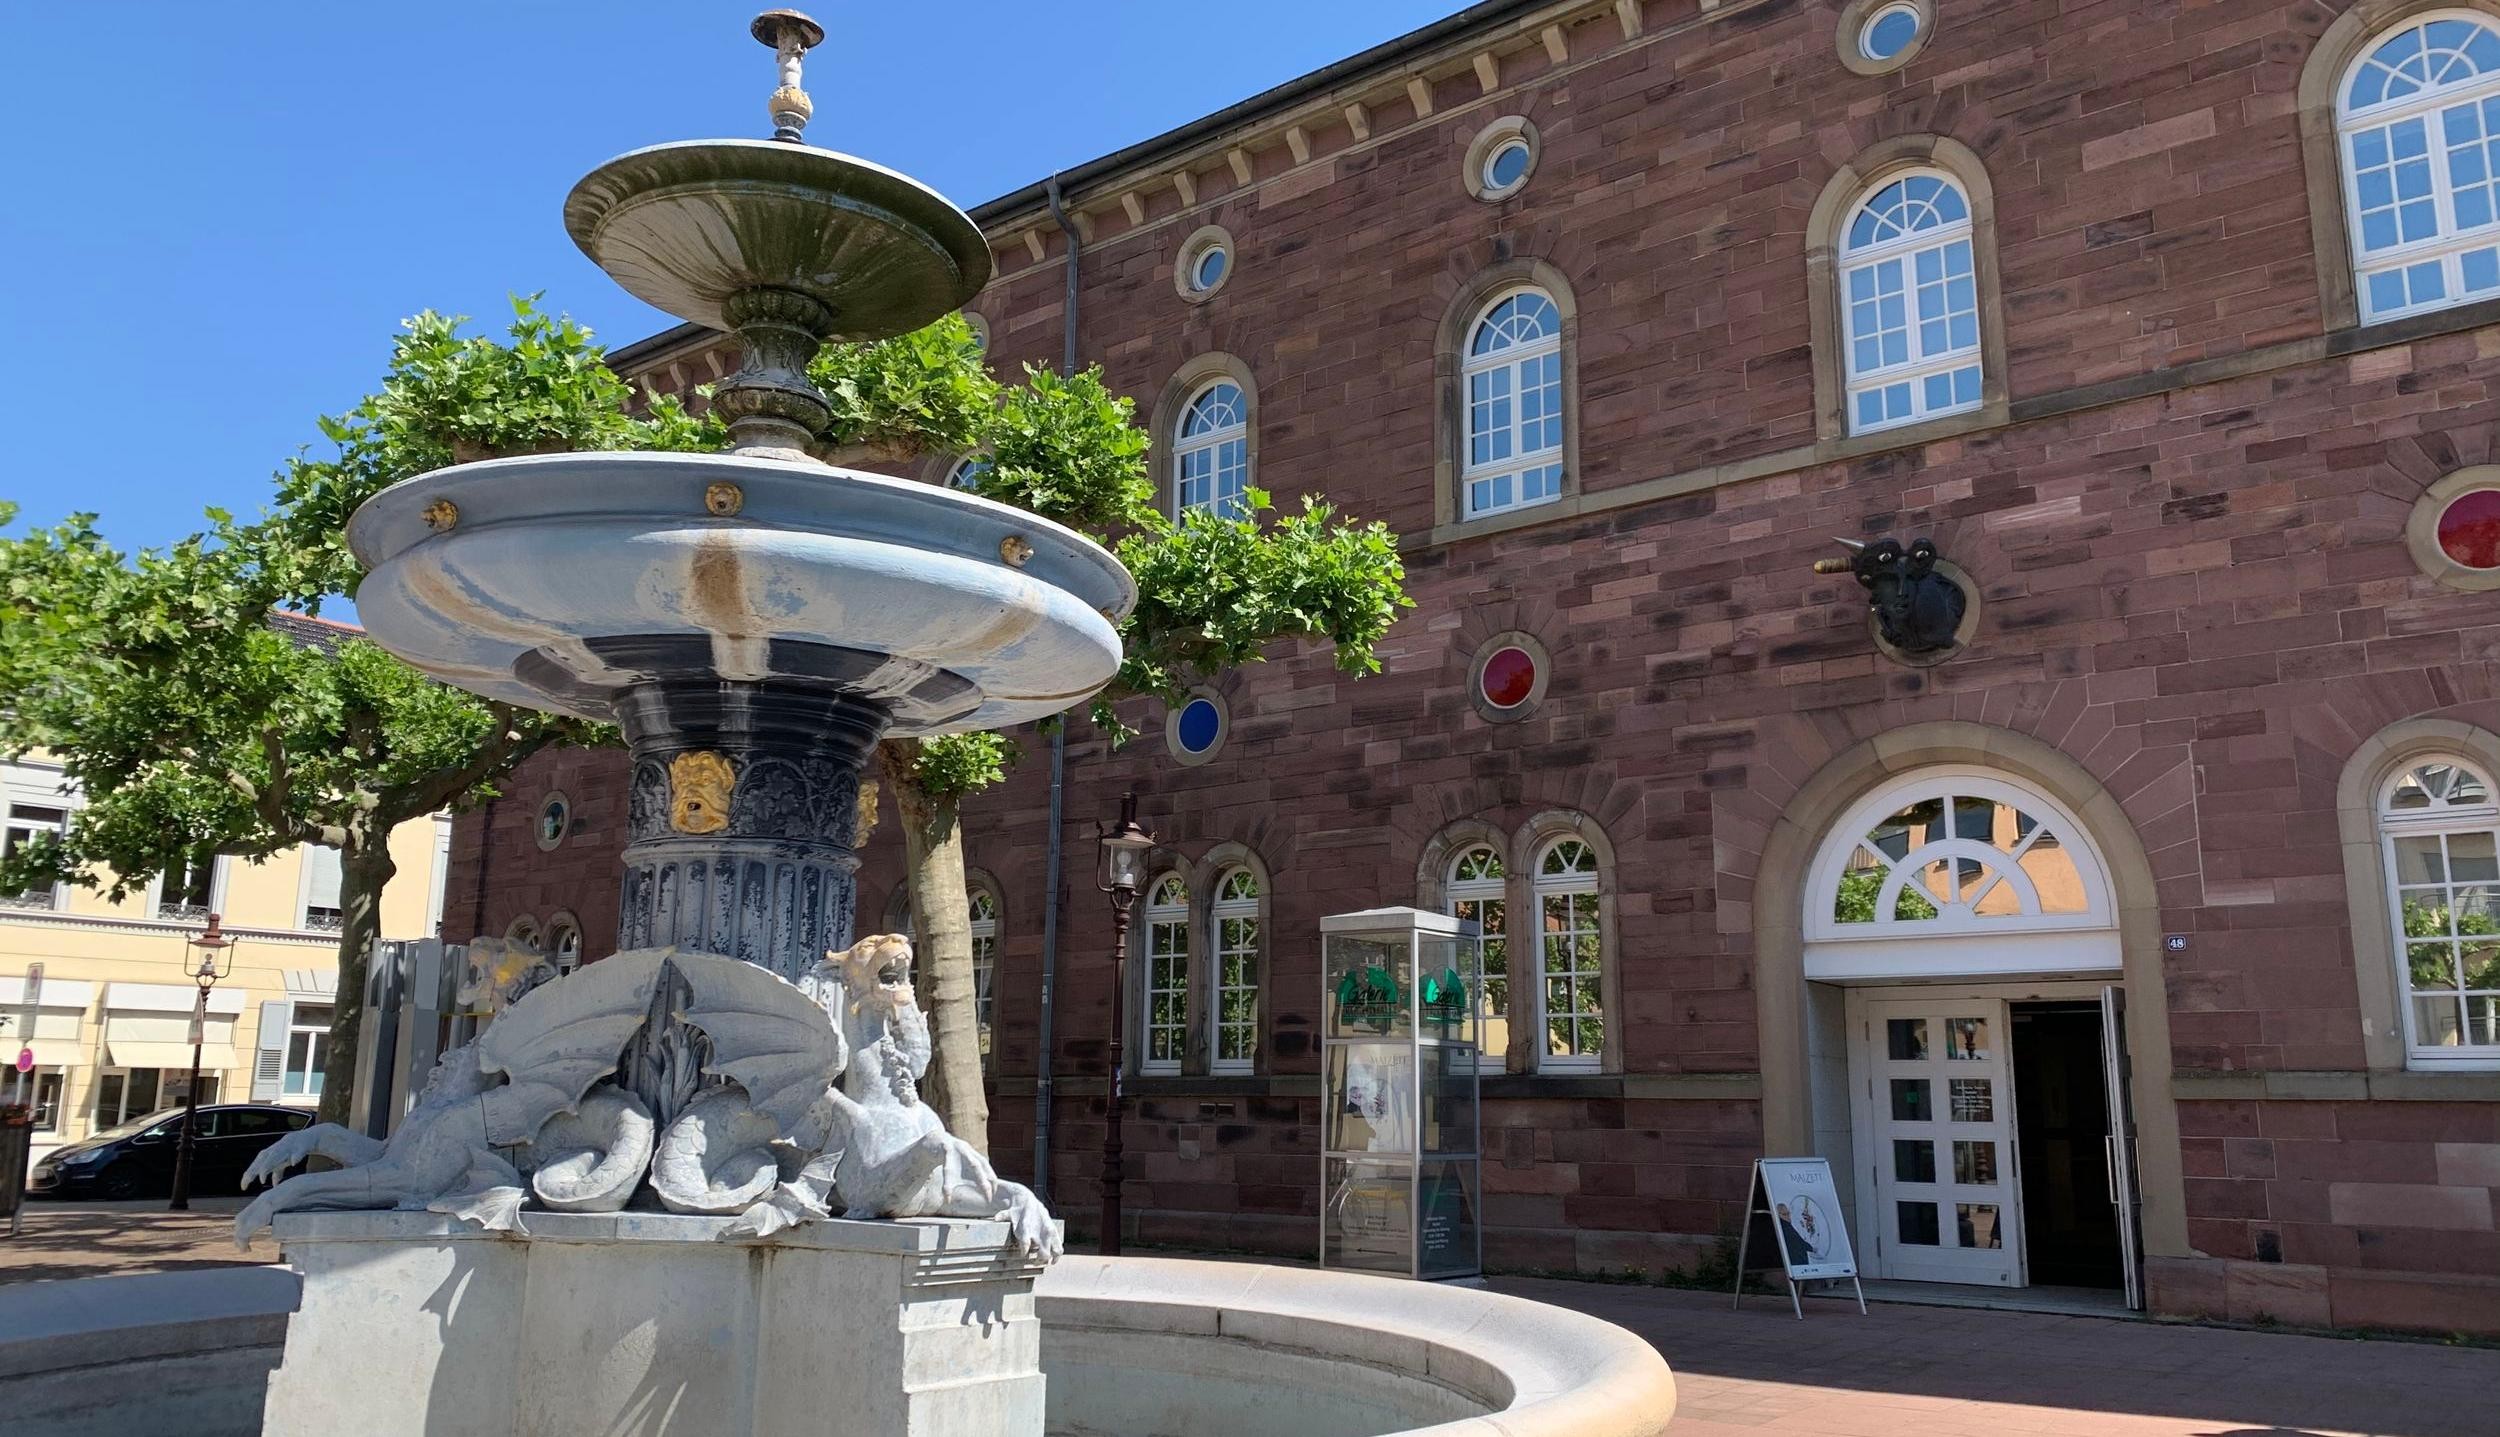 Entrance to the Fruchthalle gallery in Rastatt, exterior view with Pfeifferbrunnen fountain.